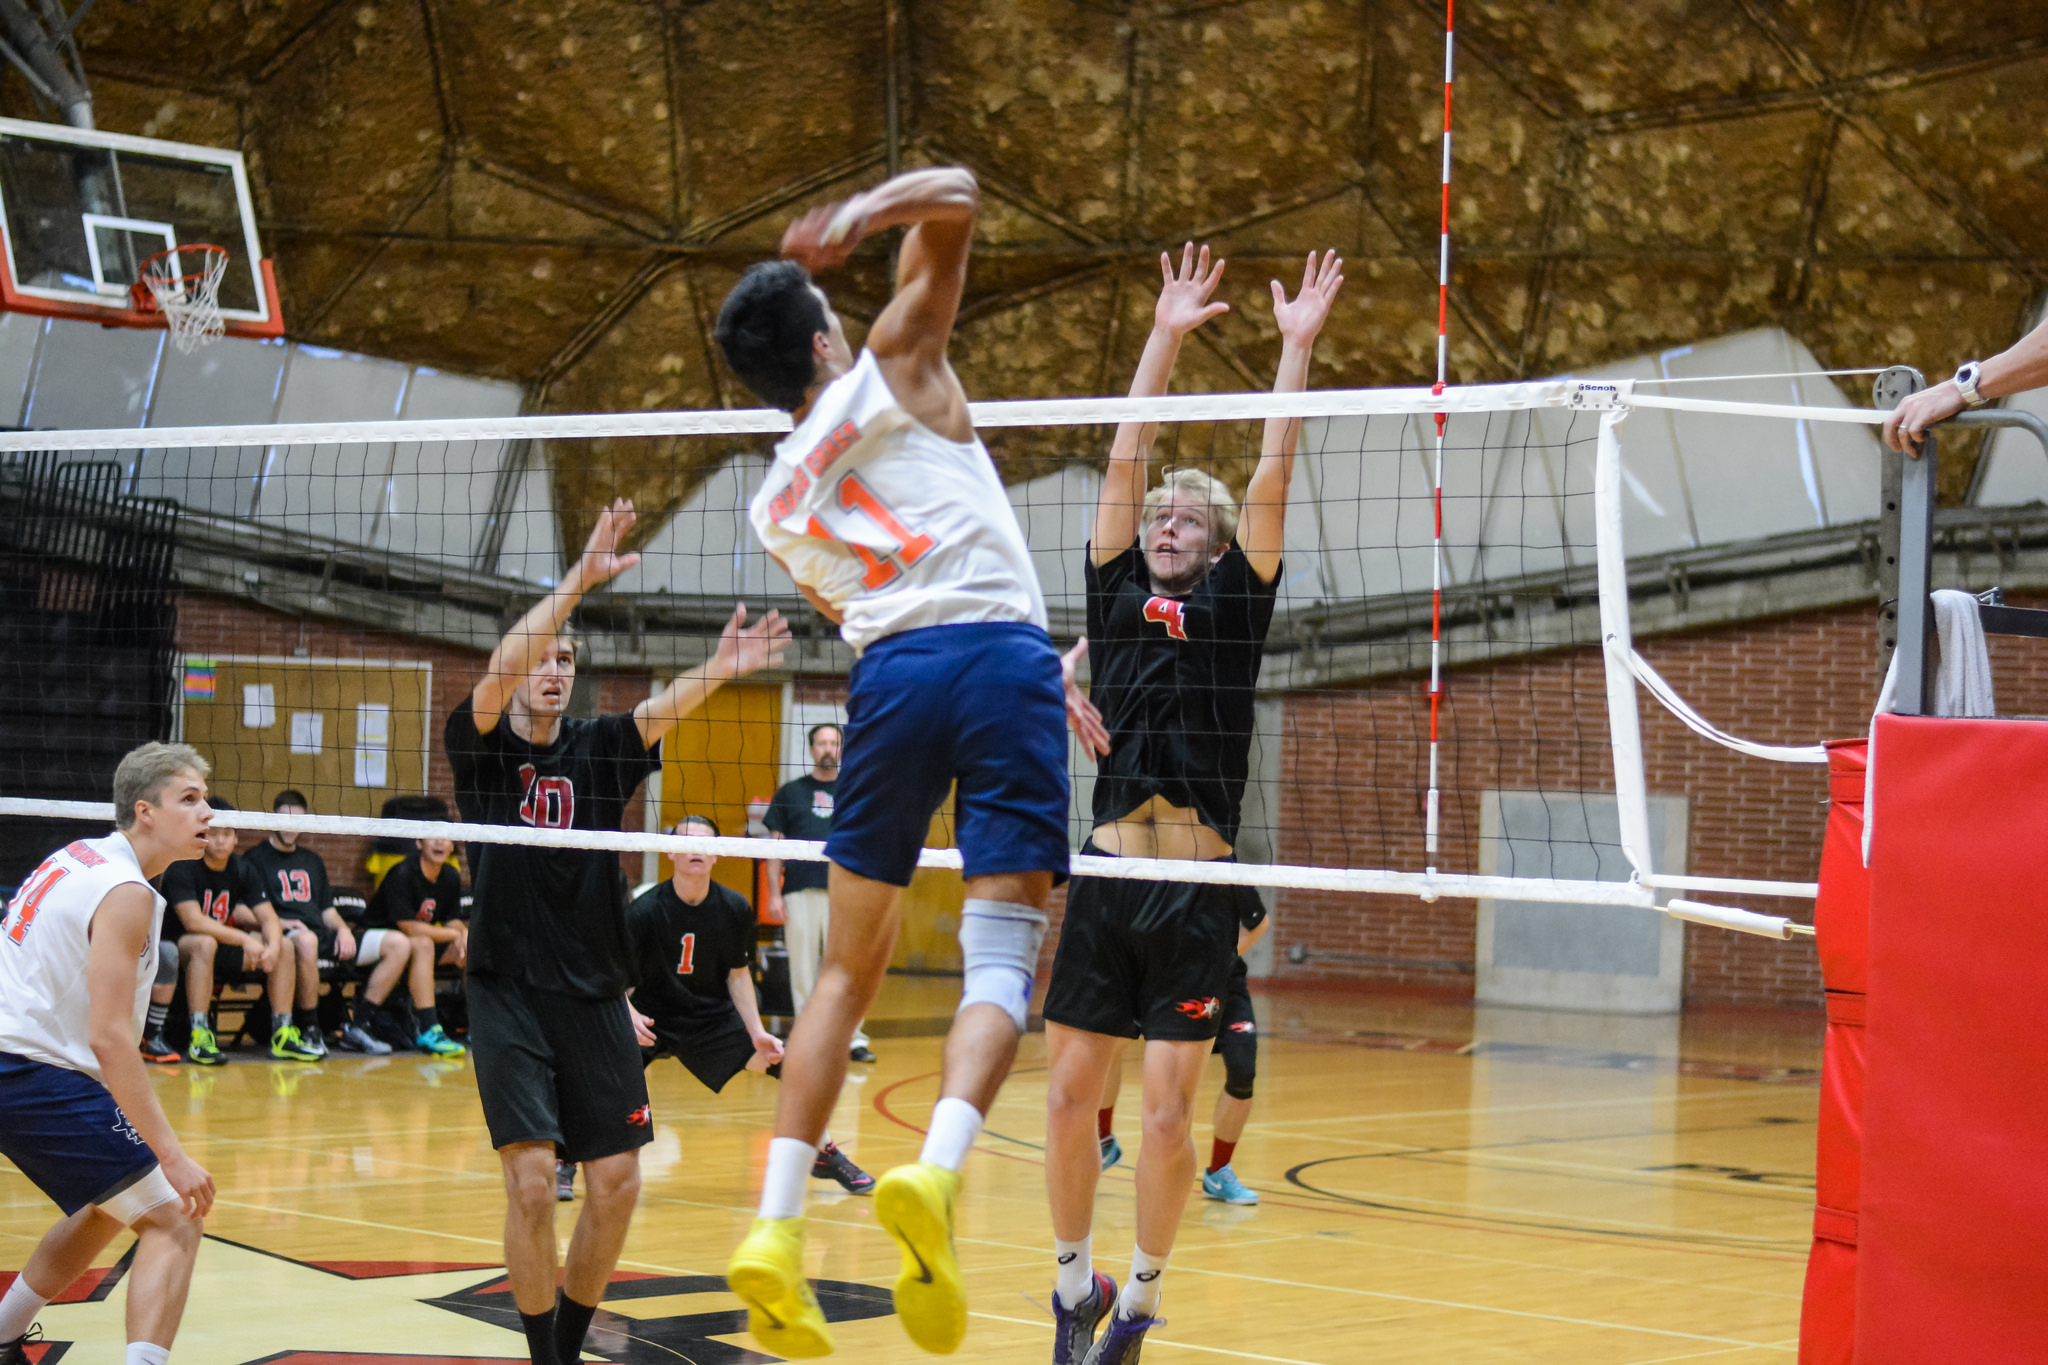 A male Palomar volleyball player tries to block the ball as an opponent spikes it.